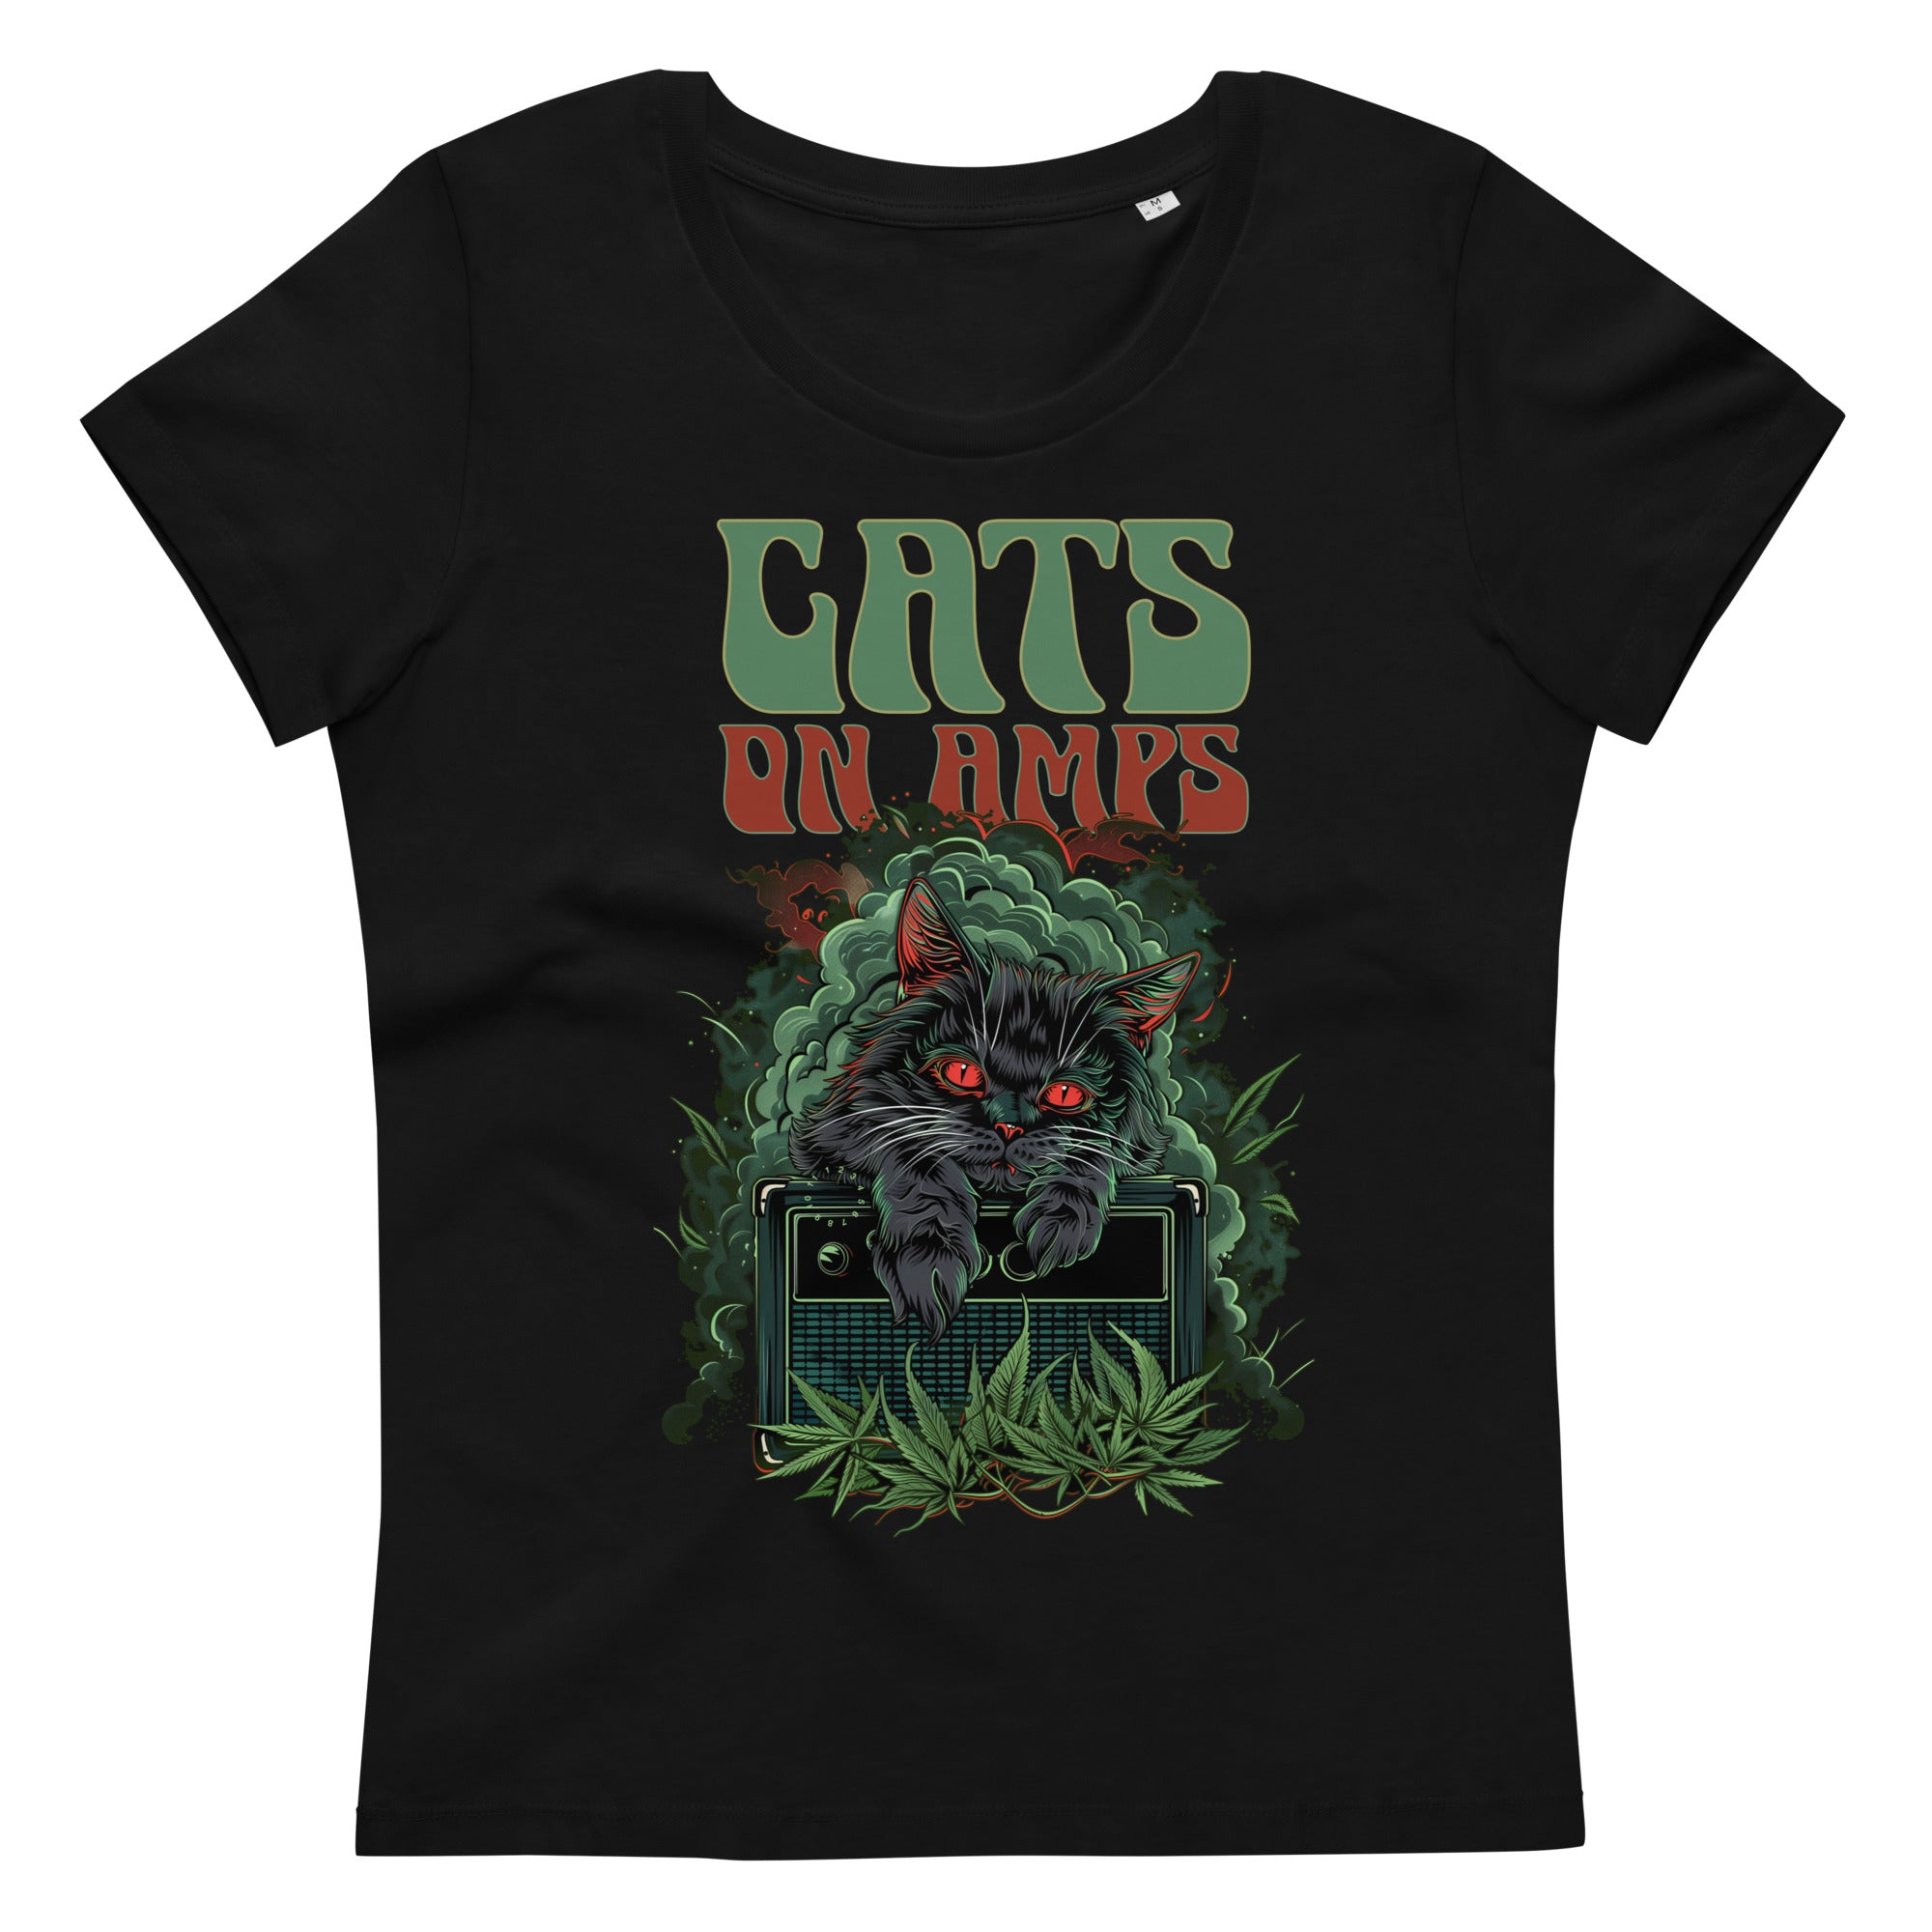 CATS ON AMPS - 420 Leaves - Women's fitted eco tee